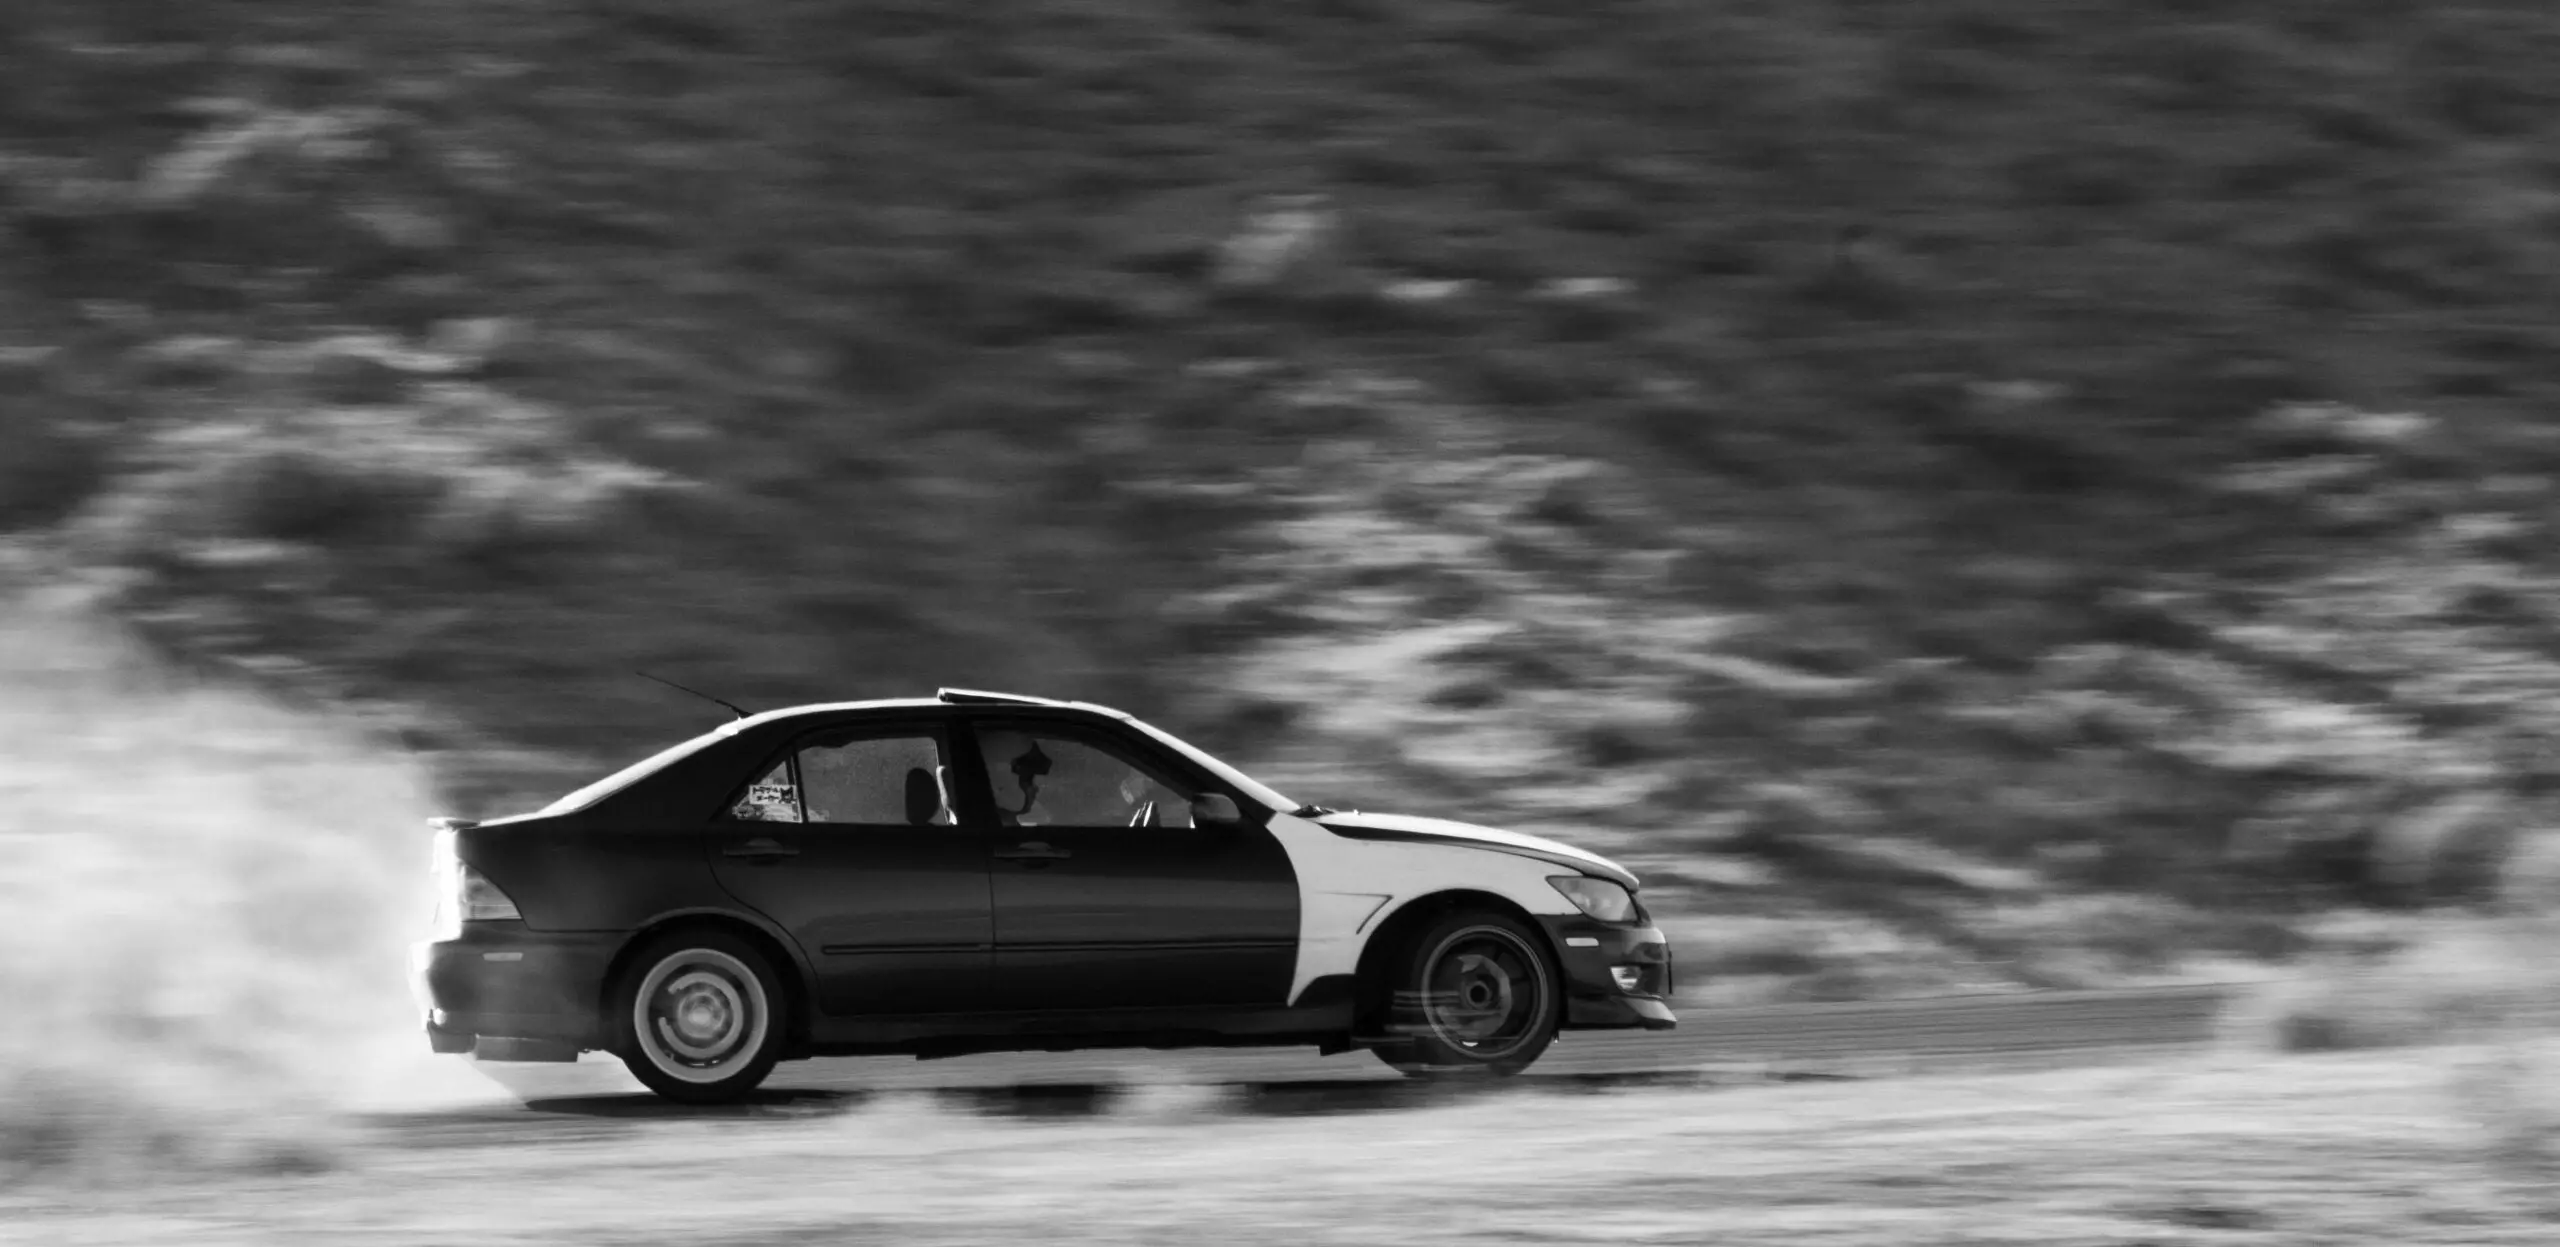 The Only Way This Drifting Lexus IS300 Could Be Better Is by Being a SportCross